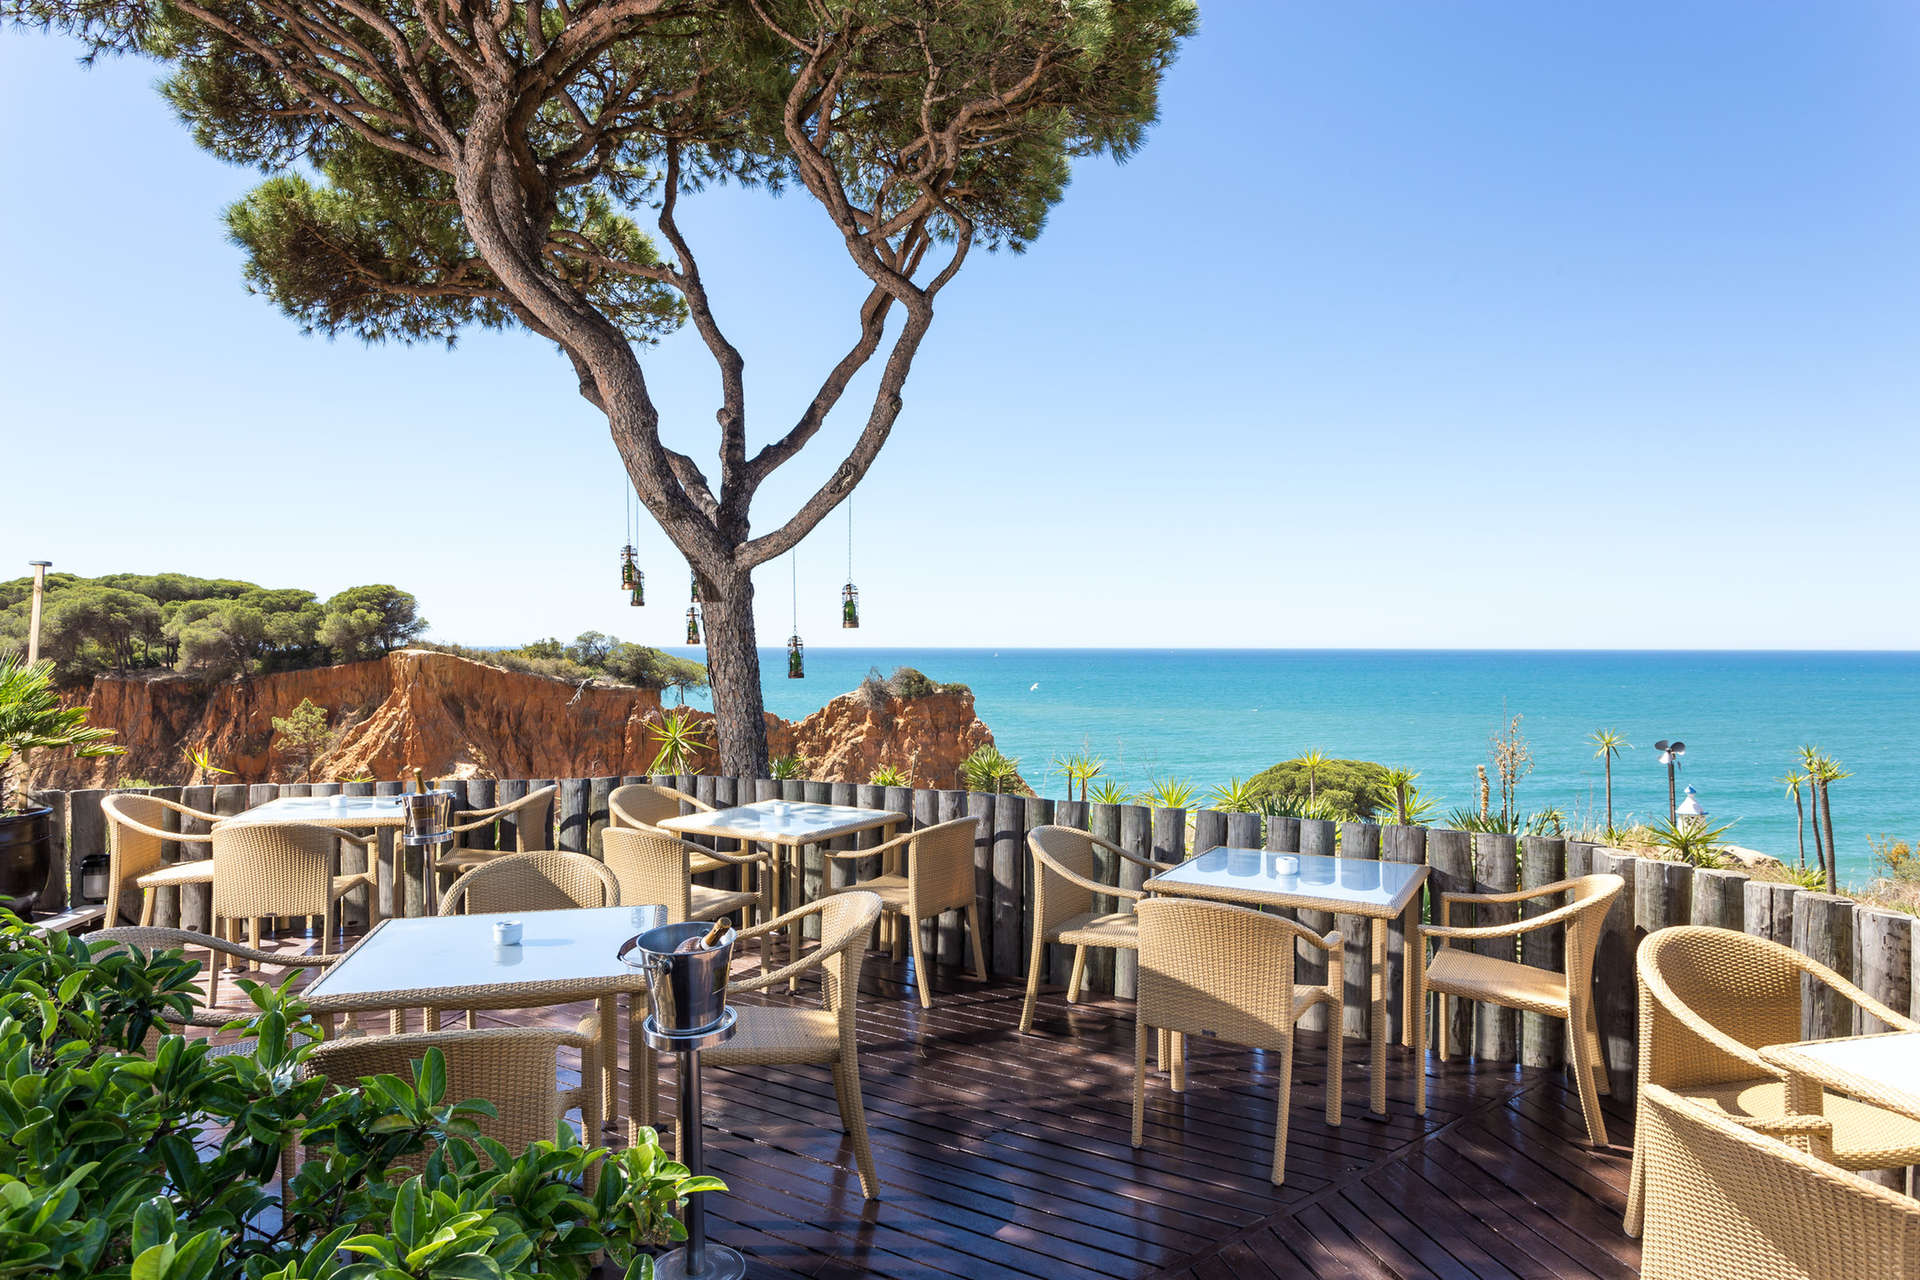 Pine Cliffs Hotel, a Luxury Collection Resort, Algarve offers guests unparalleled views of Praia da Falésia